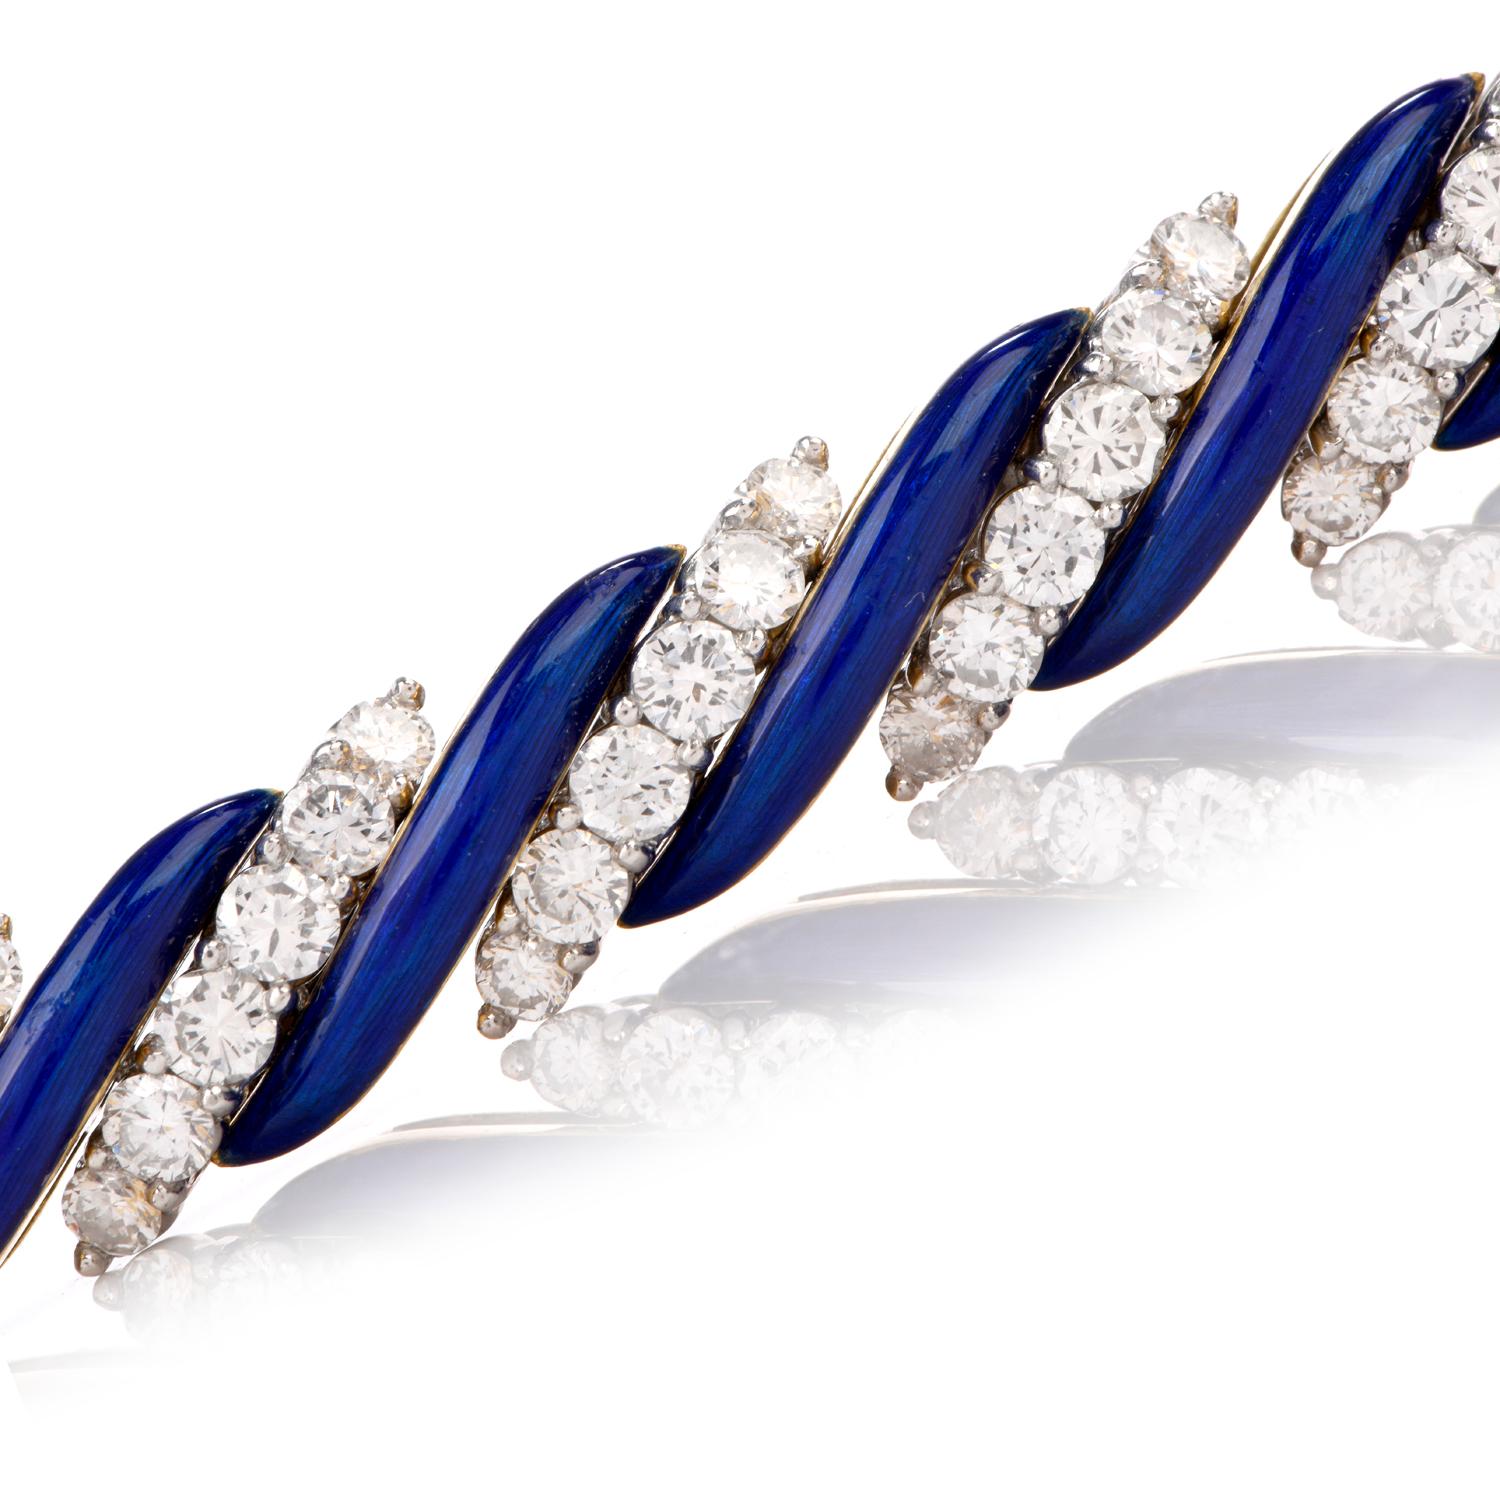 This nicely made 1960's Diamond and Blue Enamel bracelet was inspired in a Candy Stipe motif and crafted in 18 Karat gold.
Very Fine made alternating diagonal stripes of Diamond and Blue Enamel adorn this piece. 86 fine round-cut diamonds weighing